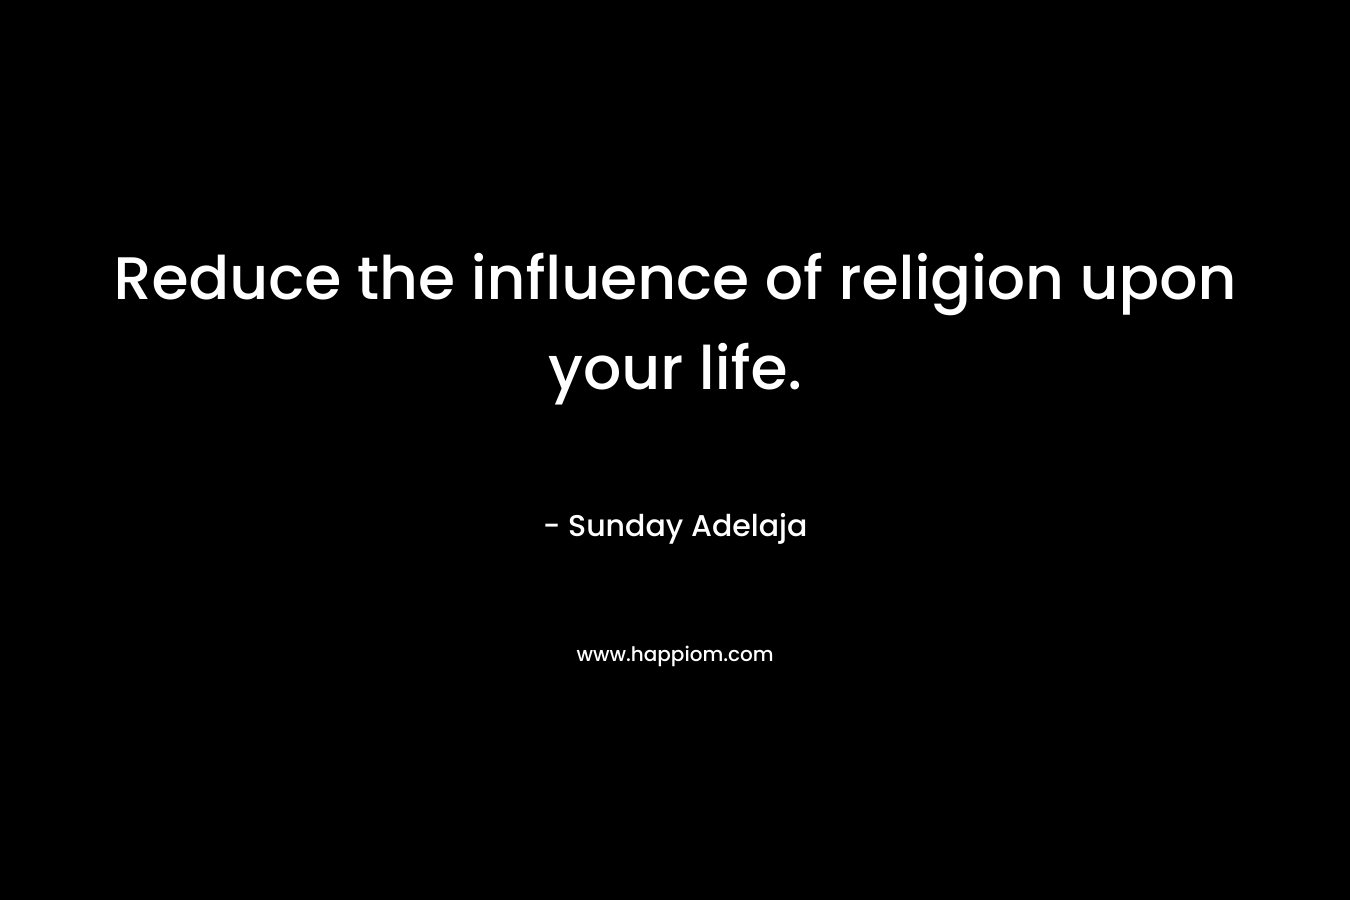 Reduce the influence of religion upon your life.